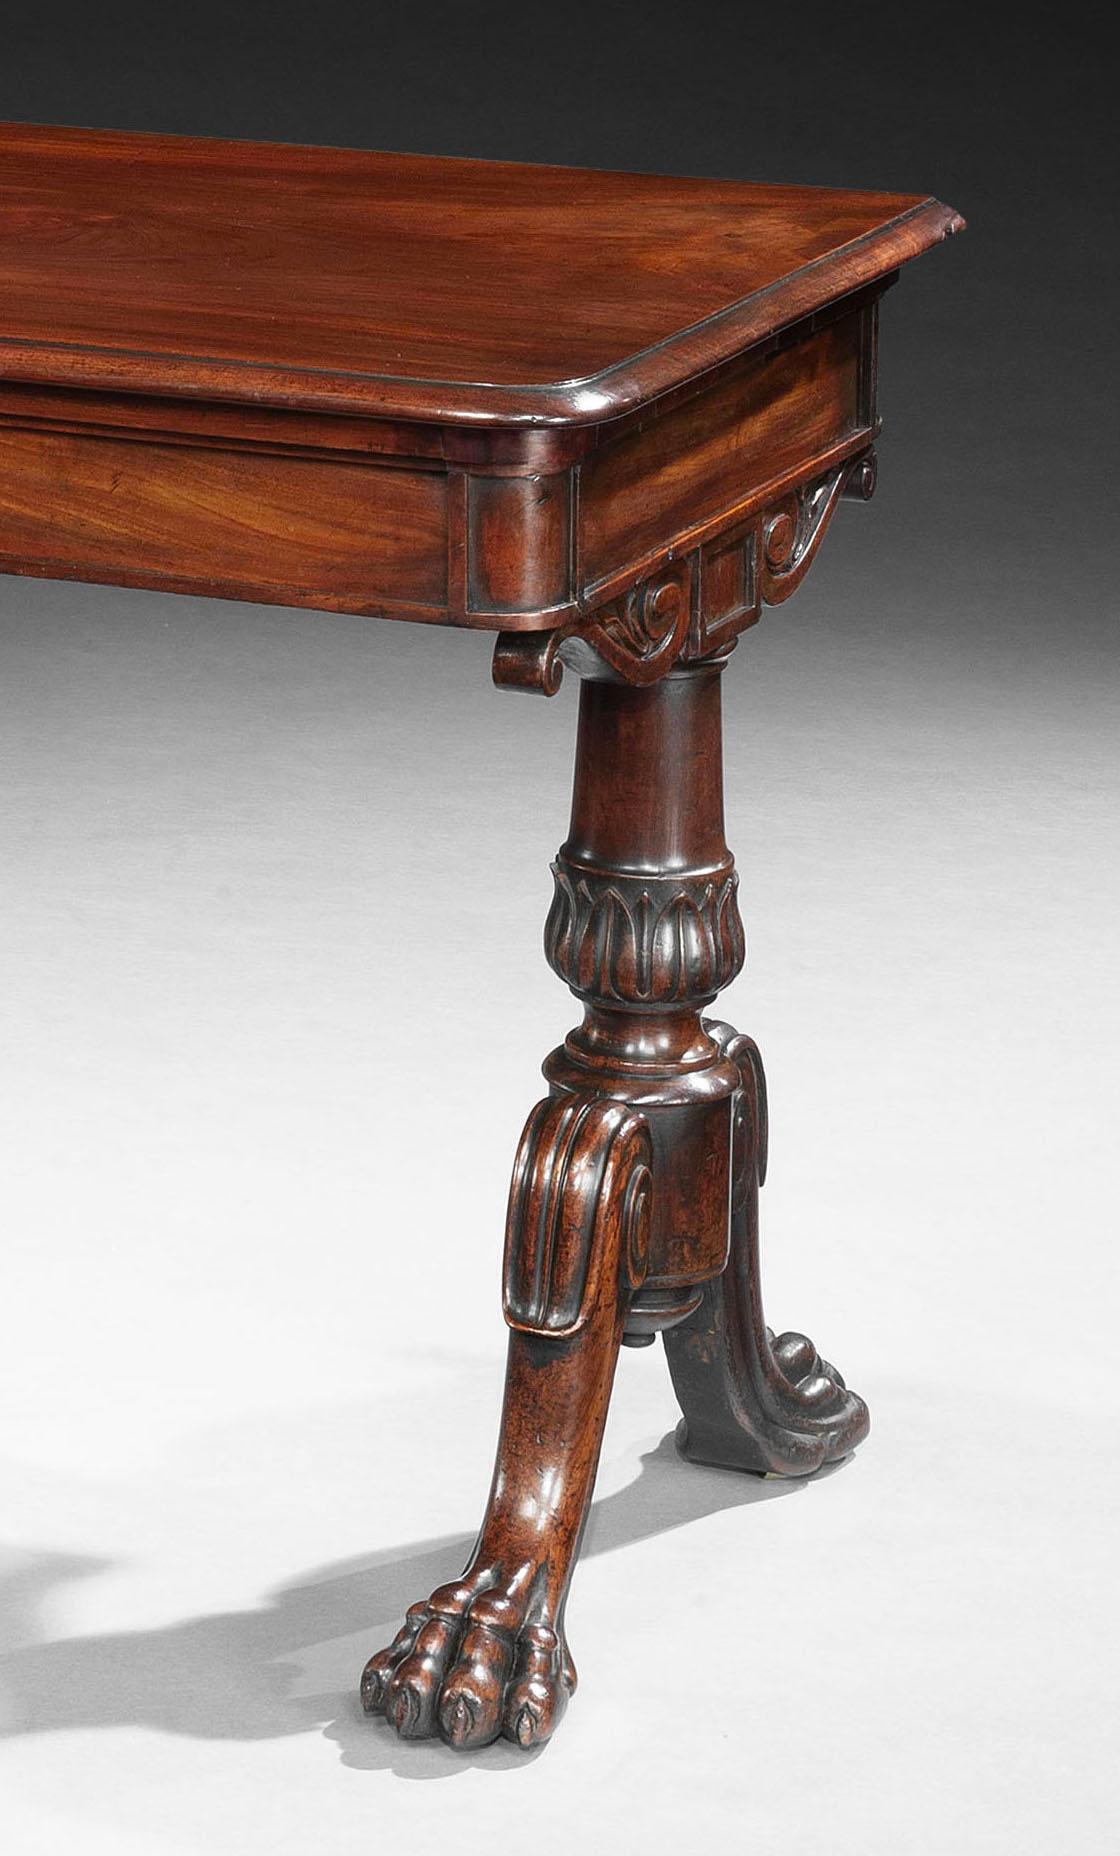 Rare 19th Century English Mahogany Extending Dining Table by Wilkinson & Sons In Good Condition For Sale In London, GB